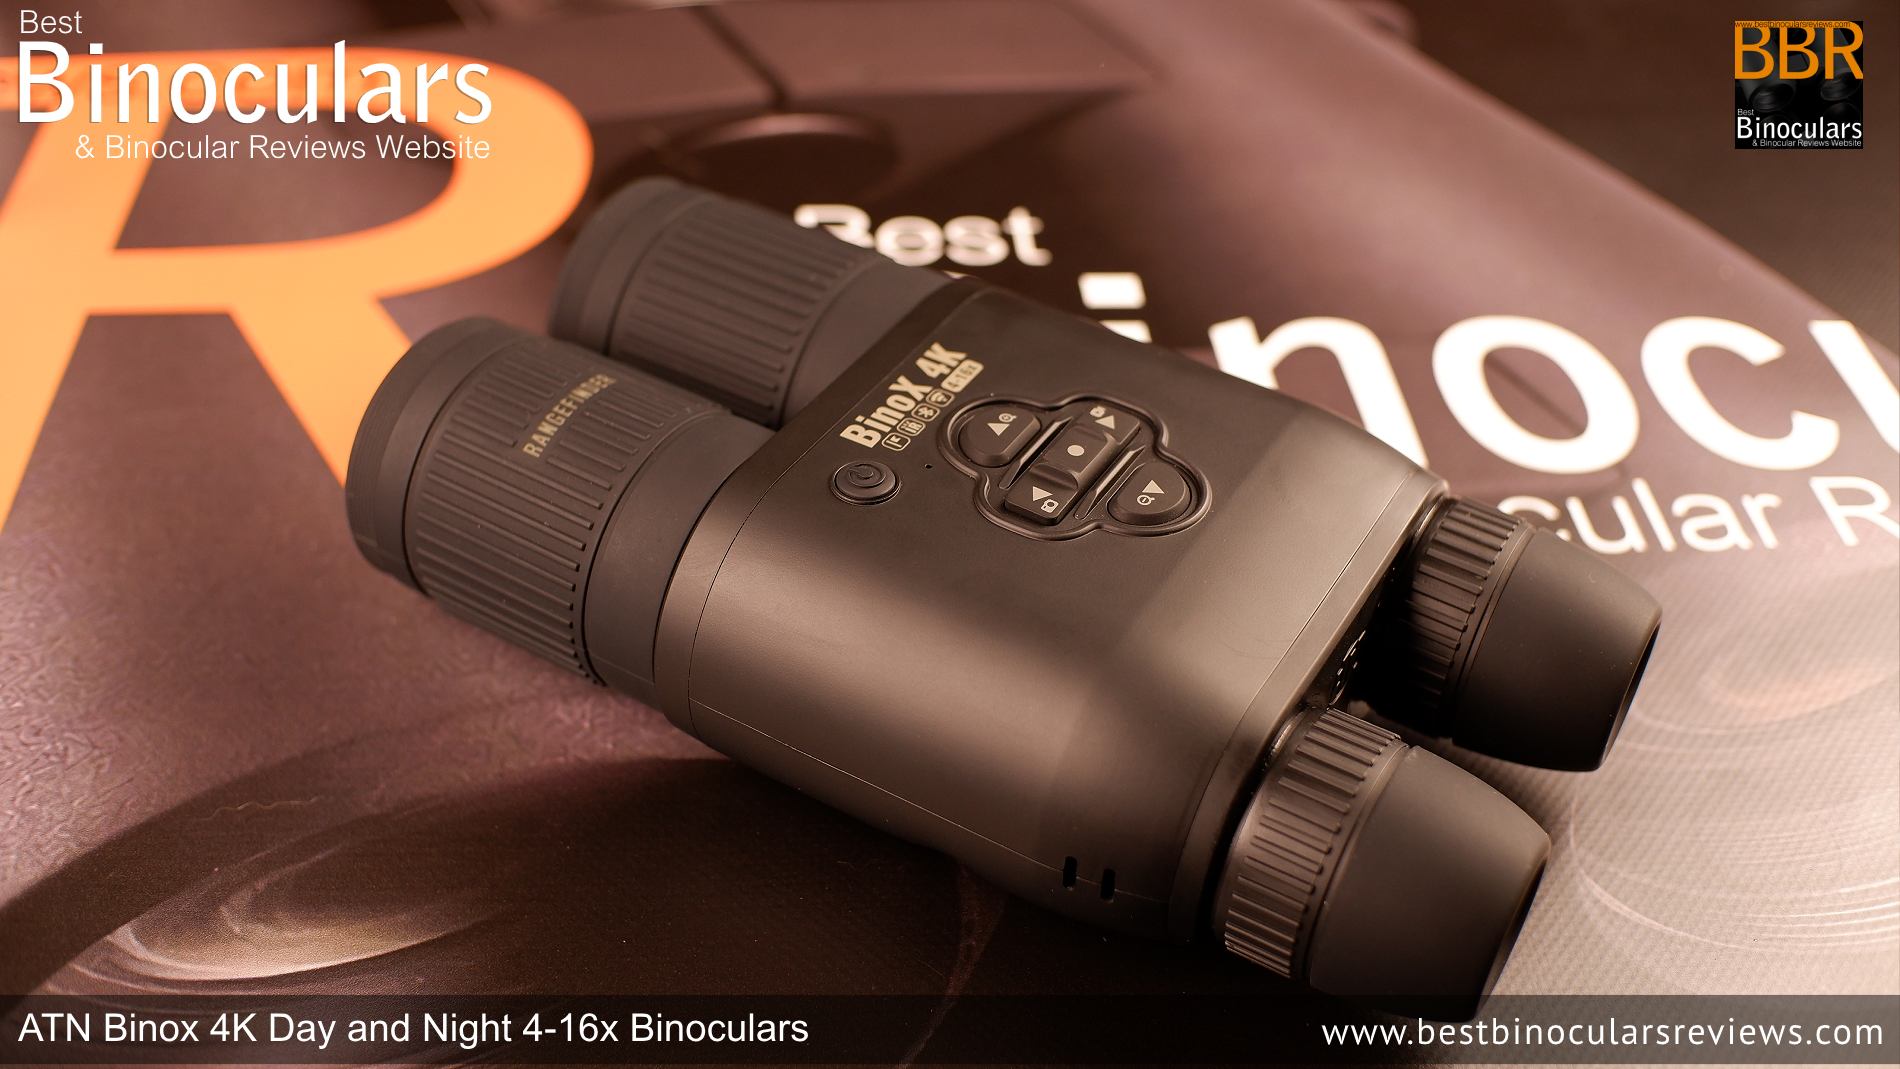 View if the ATN Binox 4K Day and Night 4-16x Binoculars showing the Keypad and power button